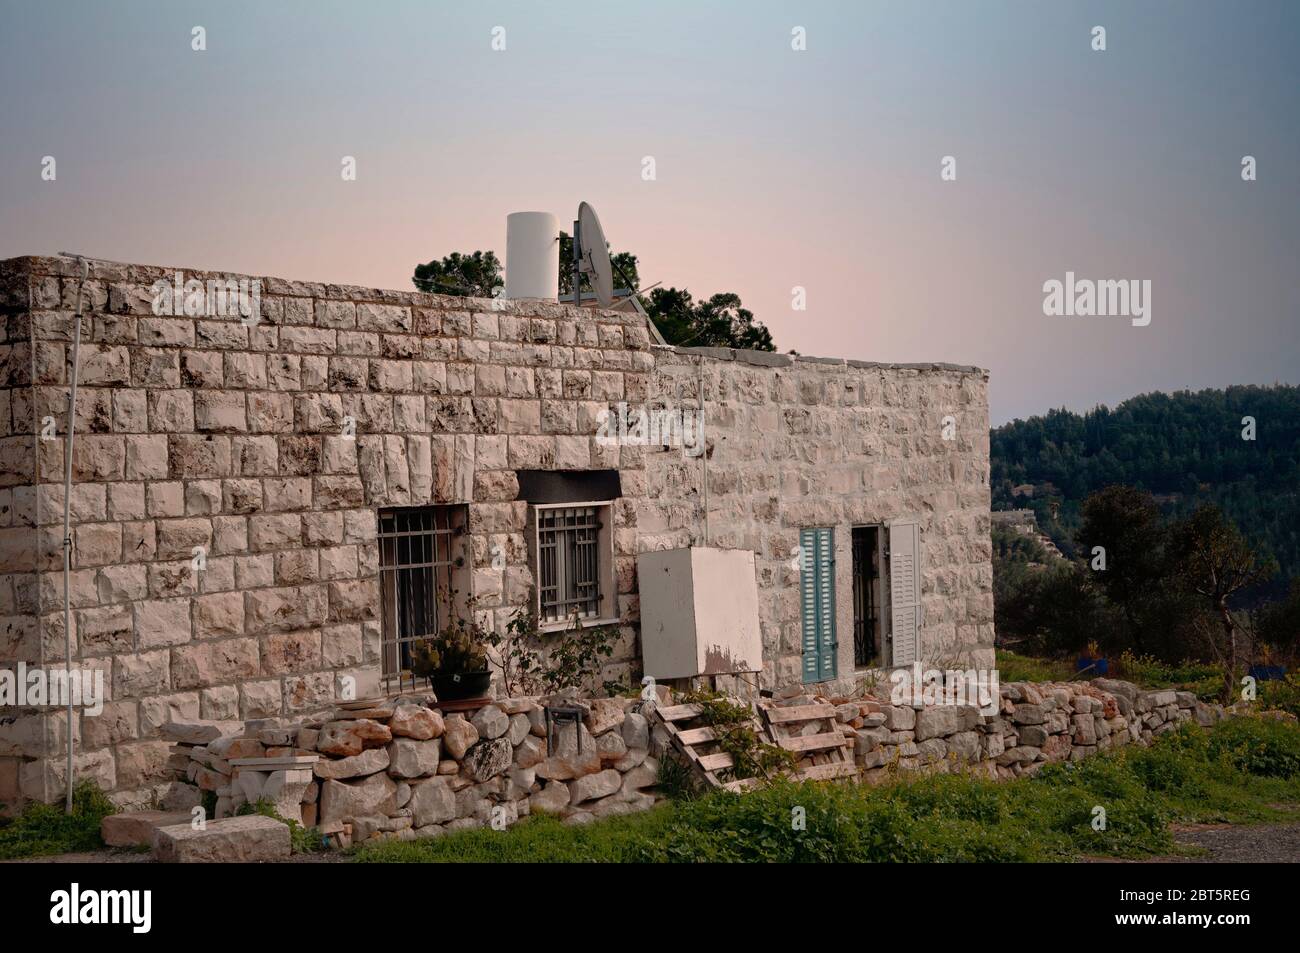 A former Palestinian house of the Arab village Deir Yassin razed after a massacre of around 107 of its residents on April 9, 1948, by the Jewish paramilitary groups Irgun and Lehi located in Givat Shaul neighborhood West Jerusalem Israel Stock Photo